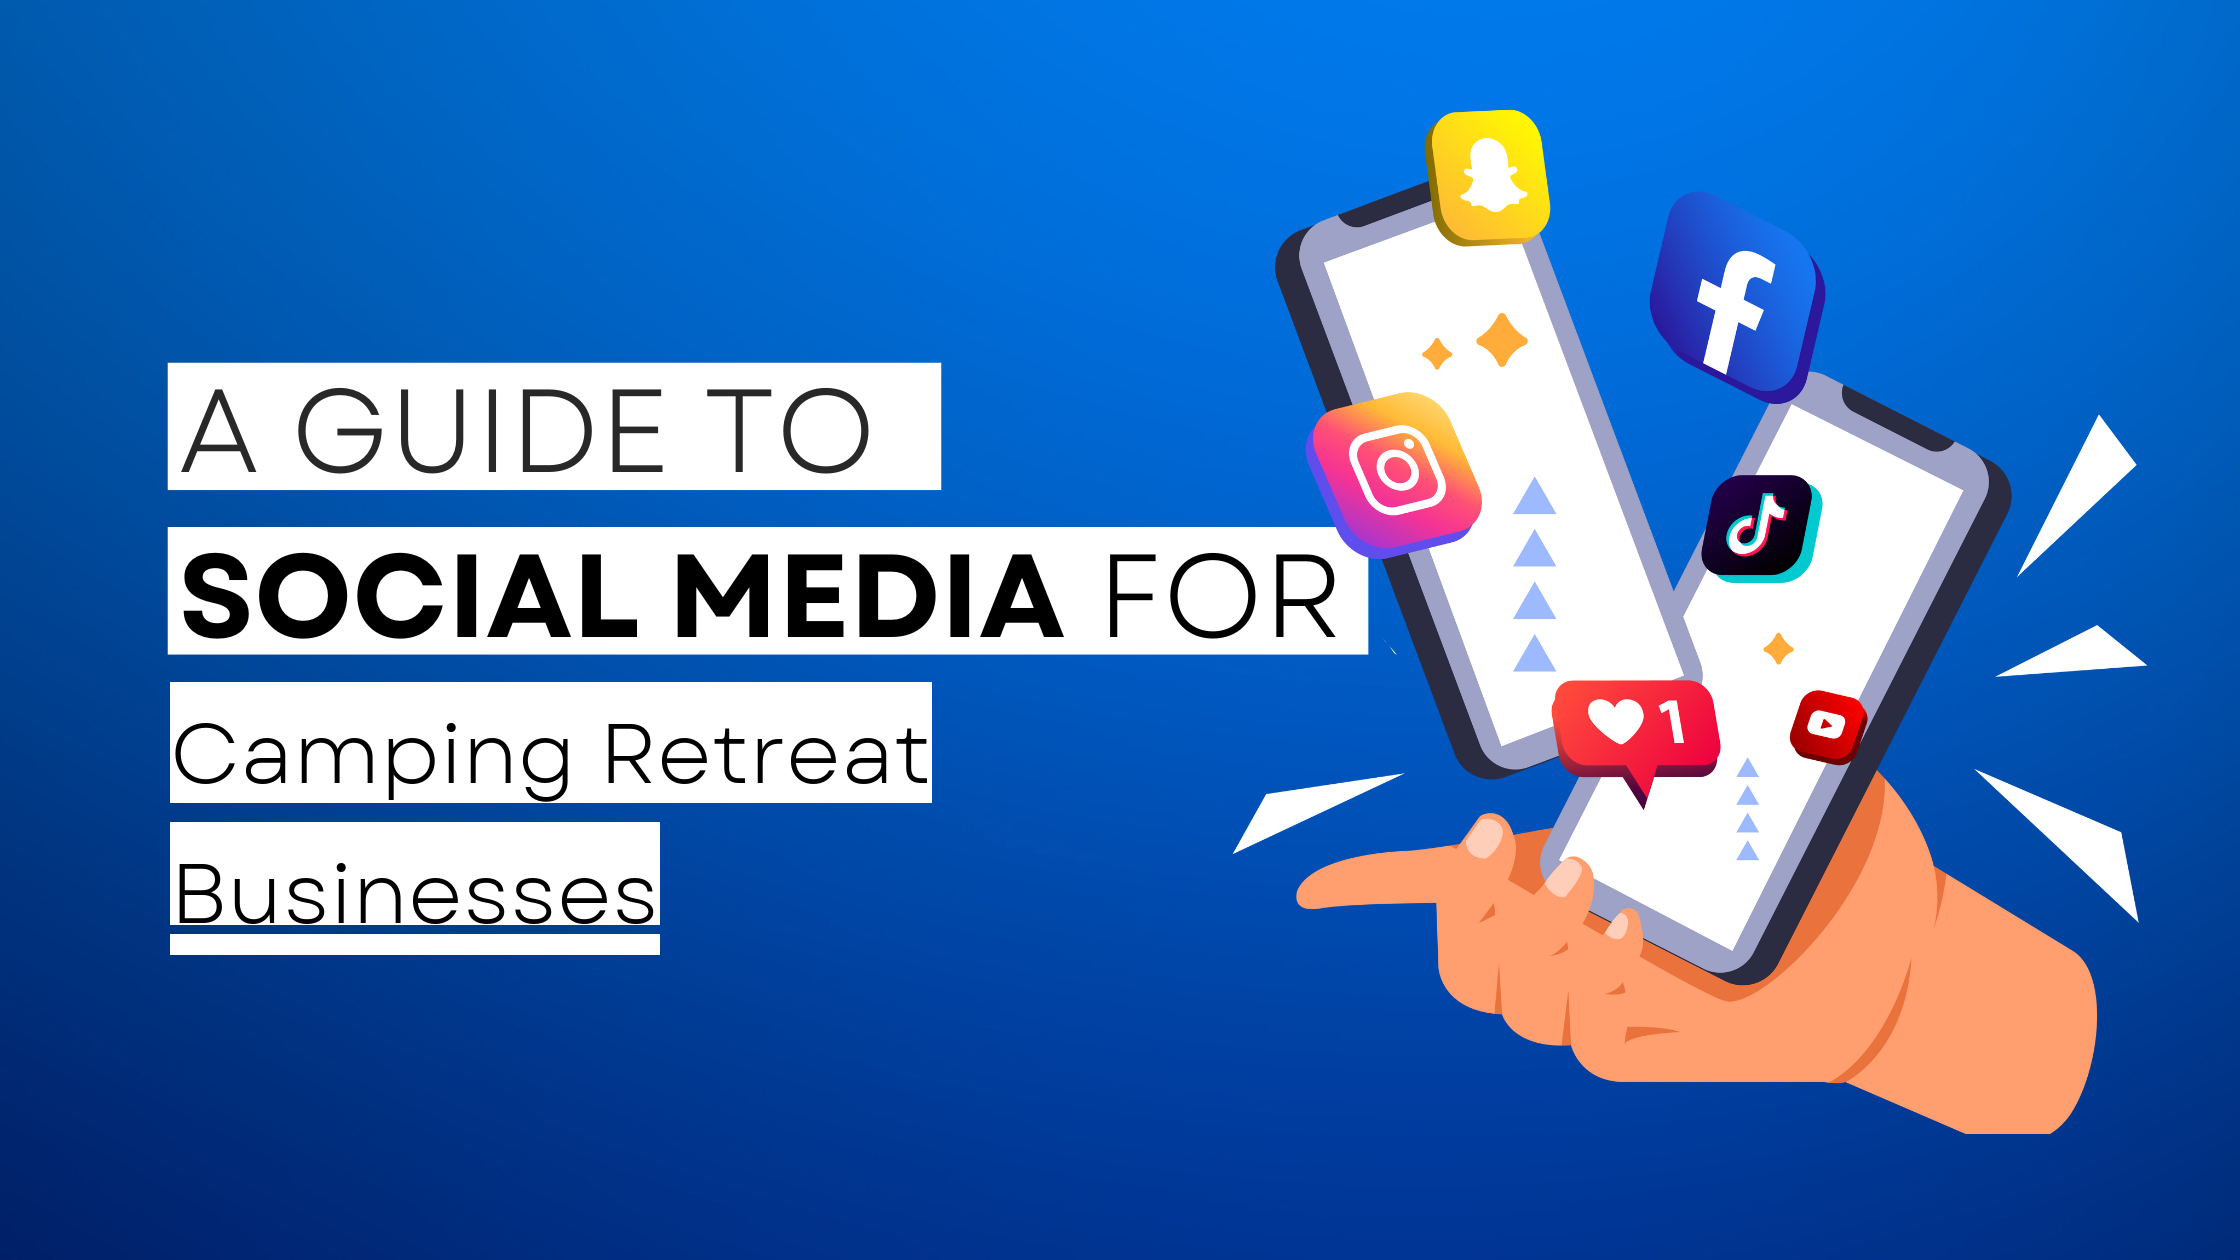 How to start Camping Retreat on social media